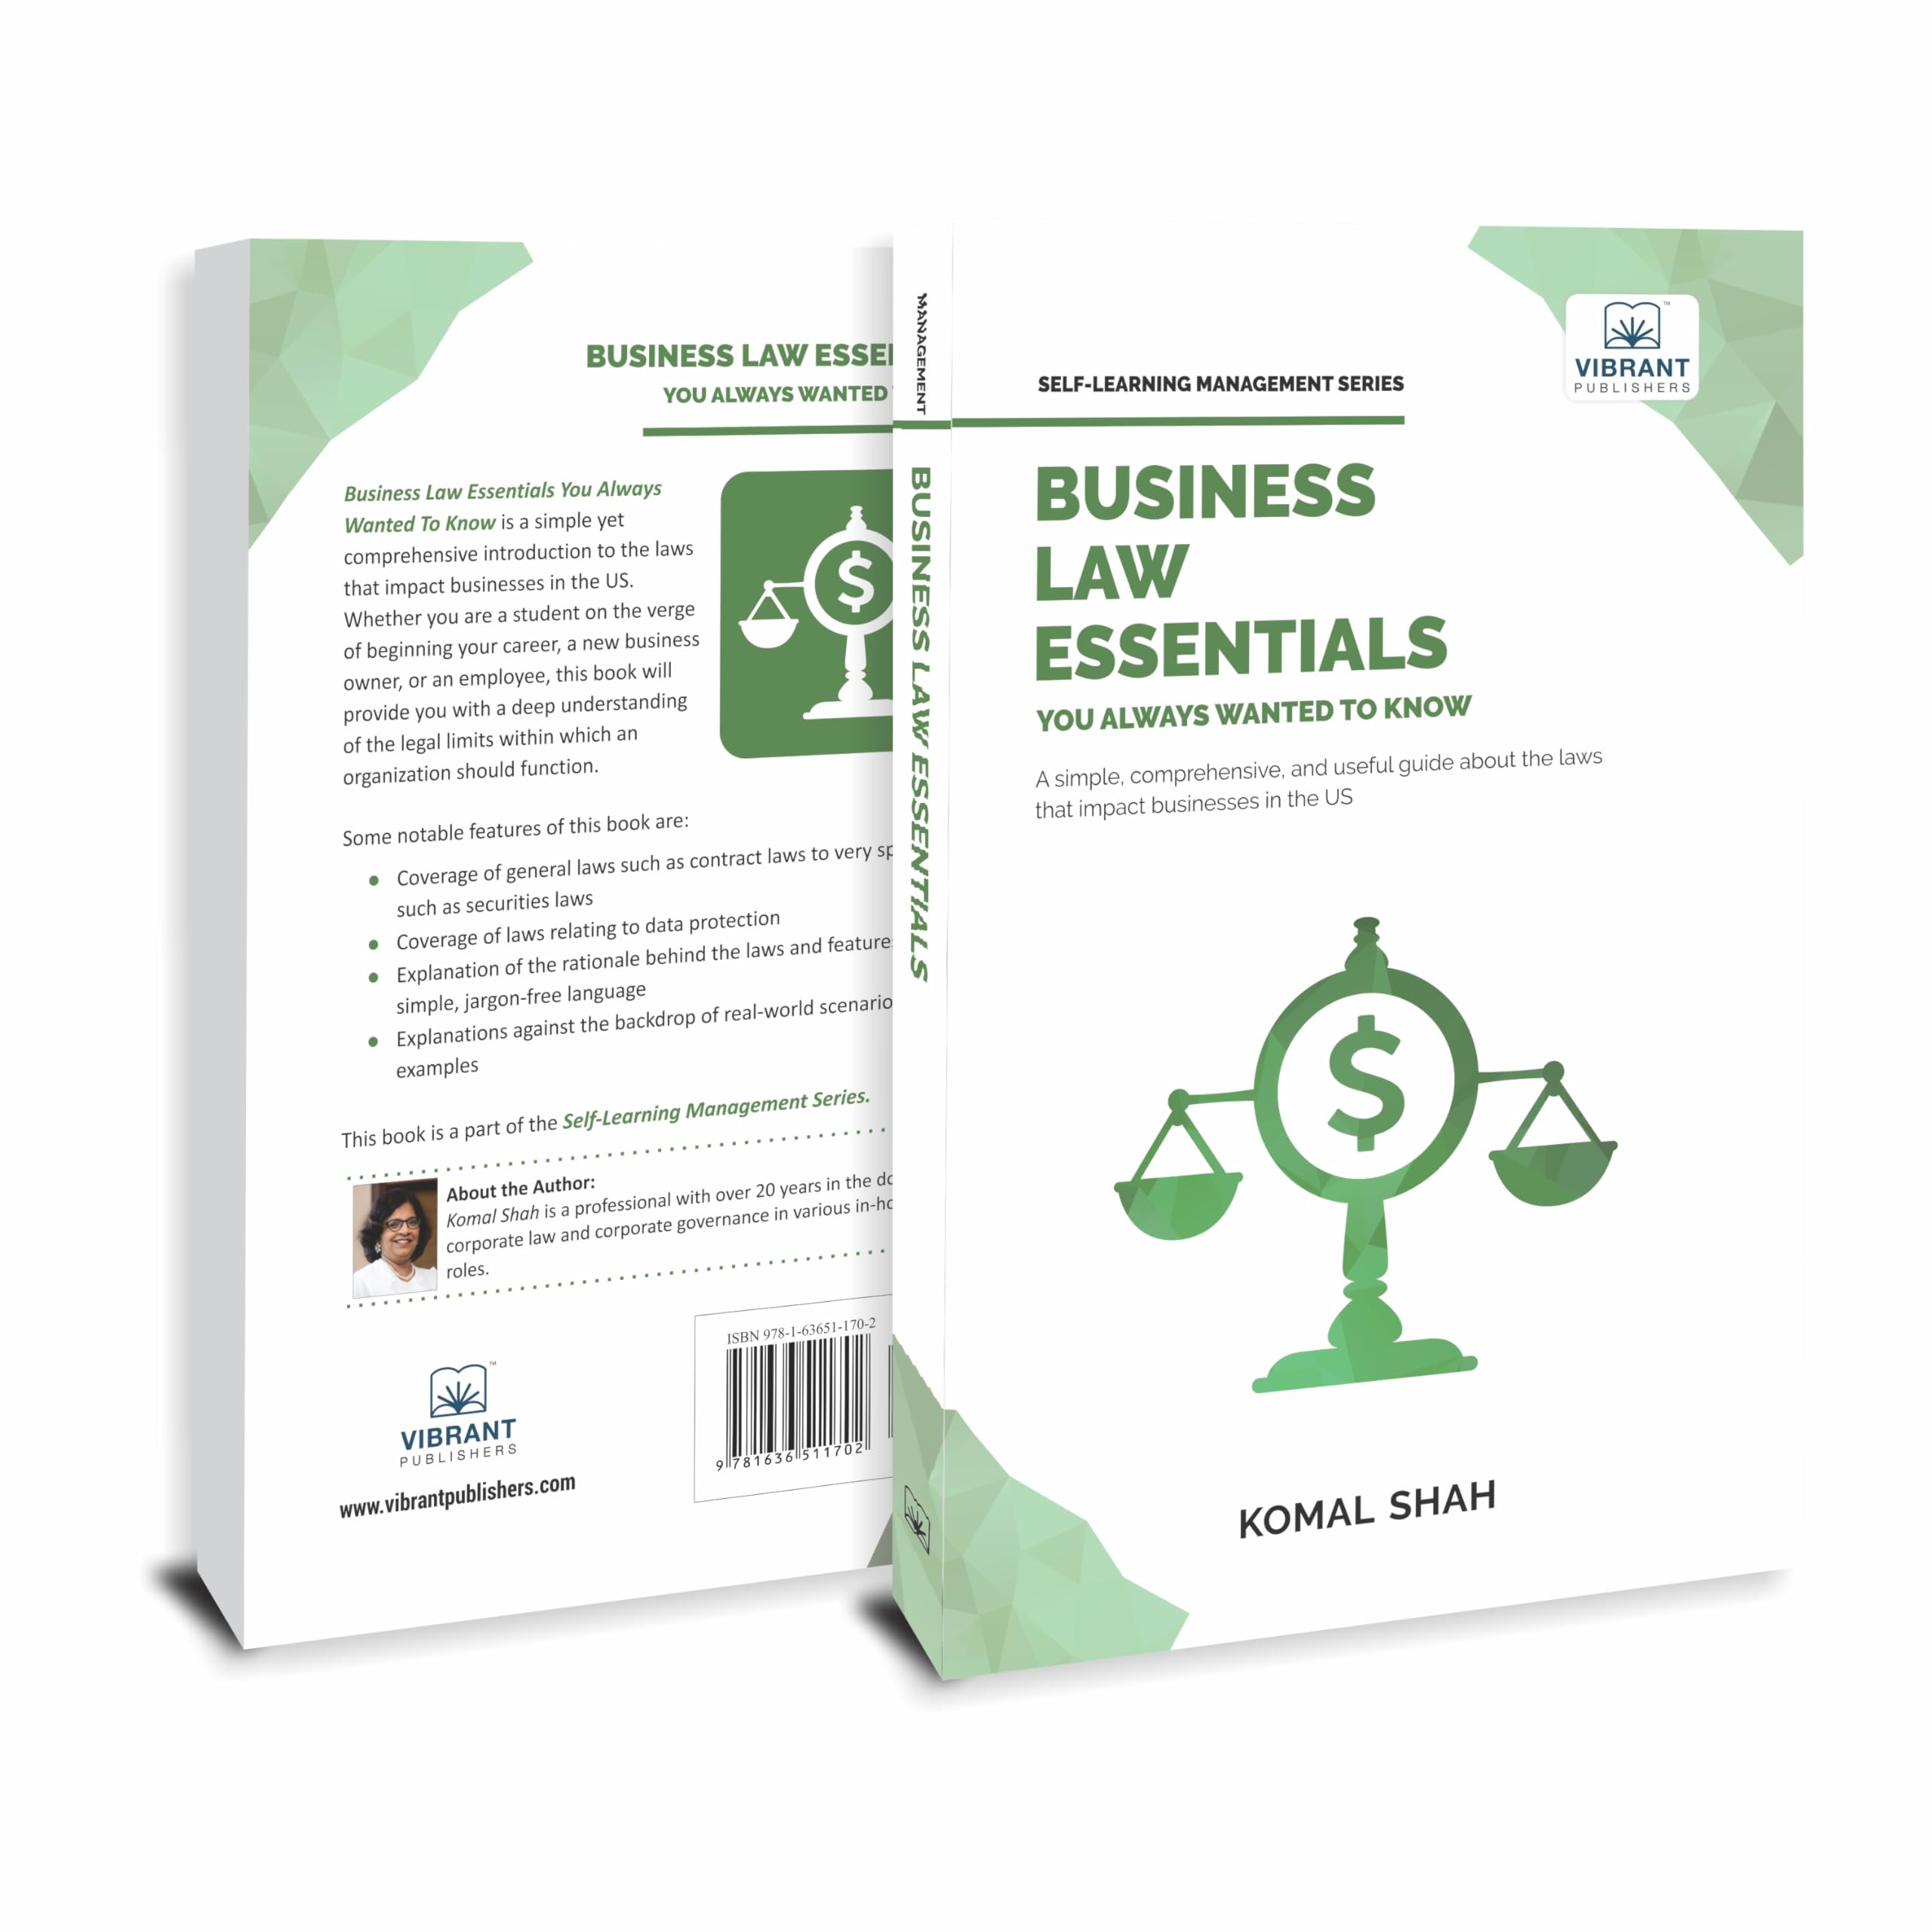 Business Law Essentials You Always Wanted To Know (Self-Learning Management Series)